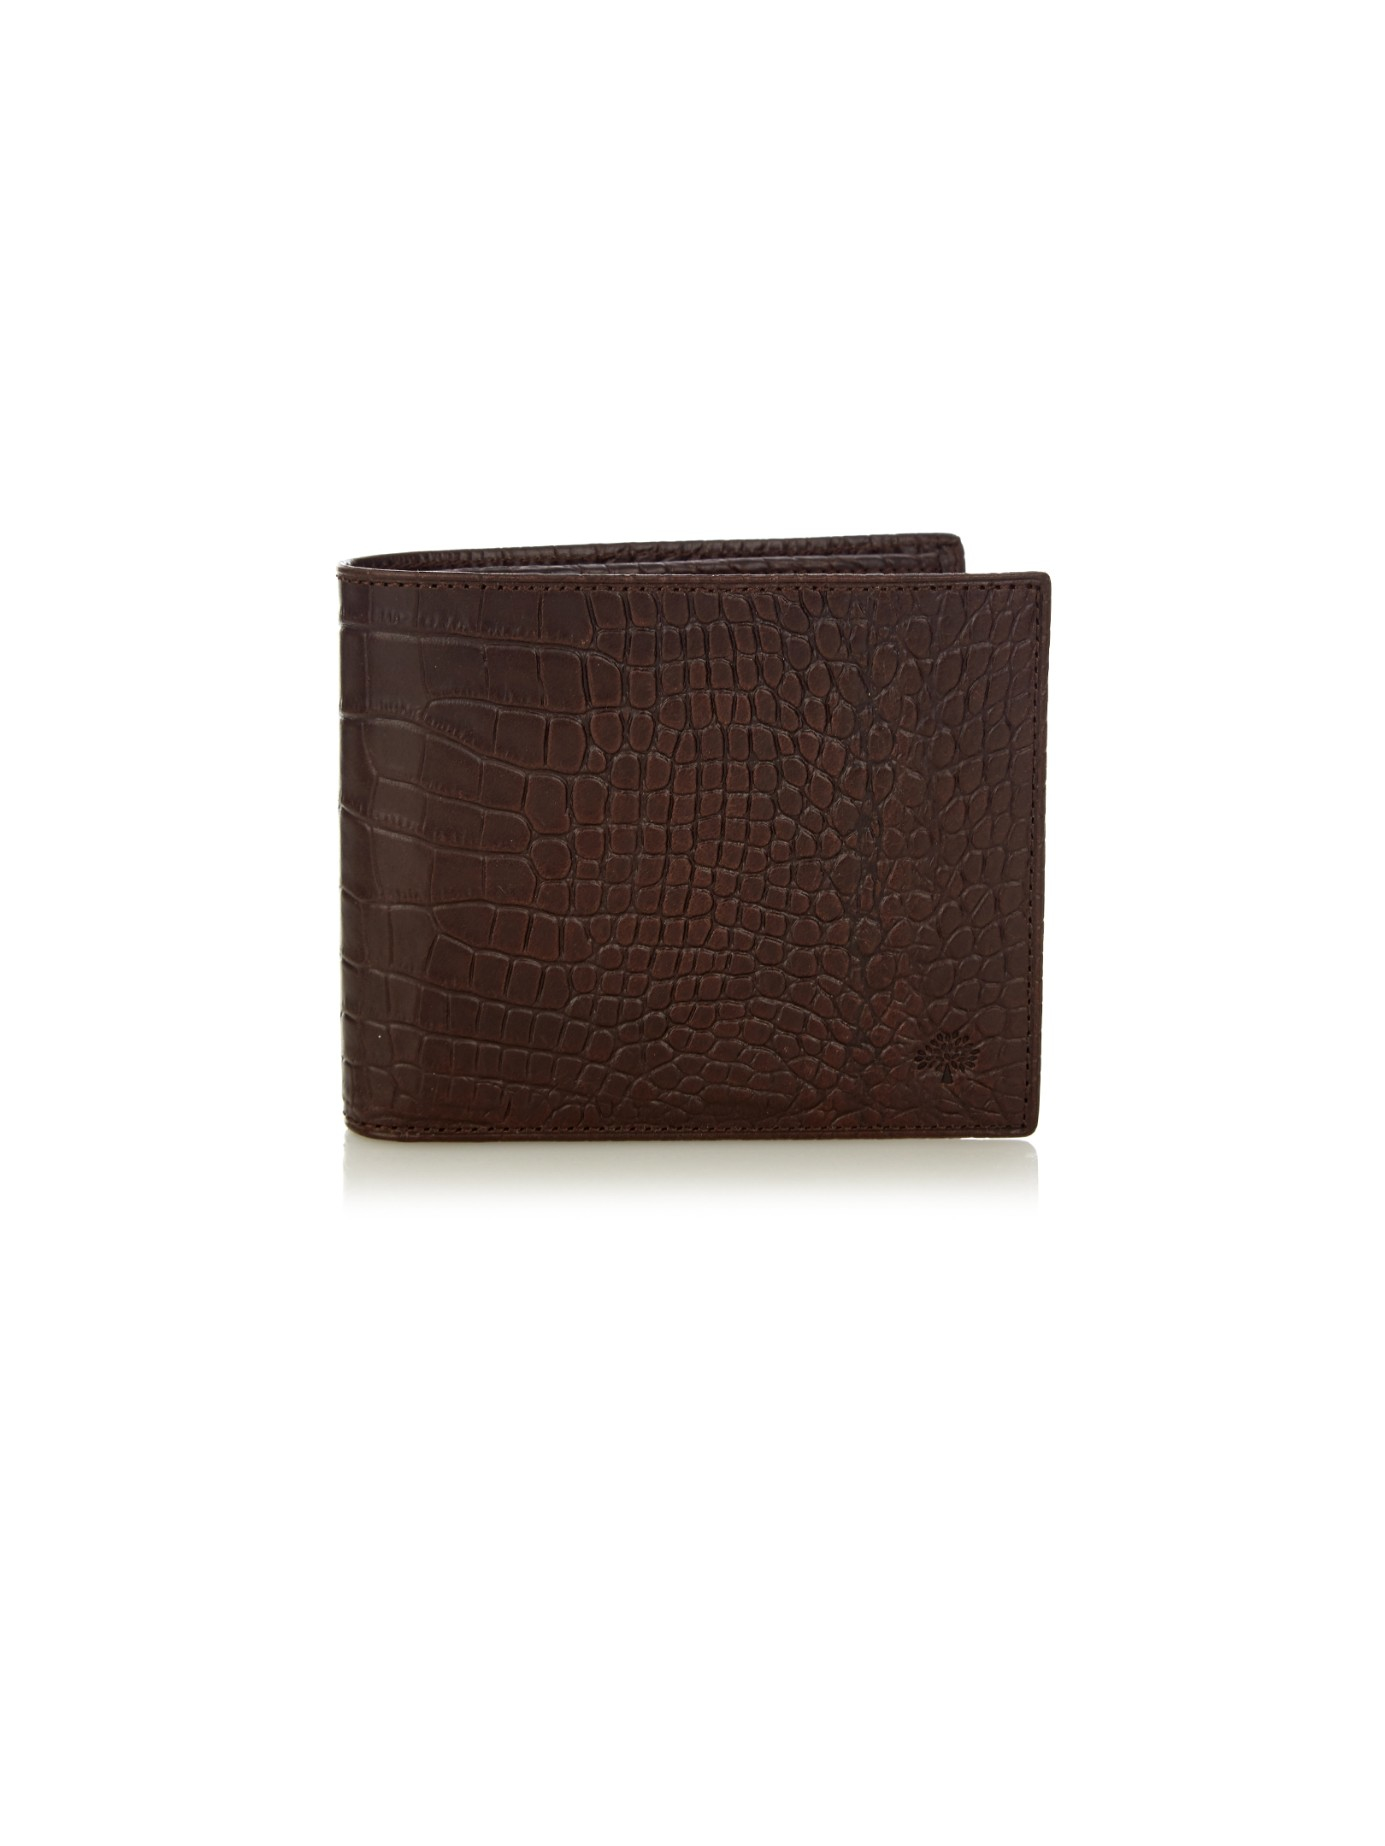 Mulberry Crocodile-Effect Leather Wallet in Brown for Men - Lyst